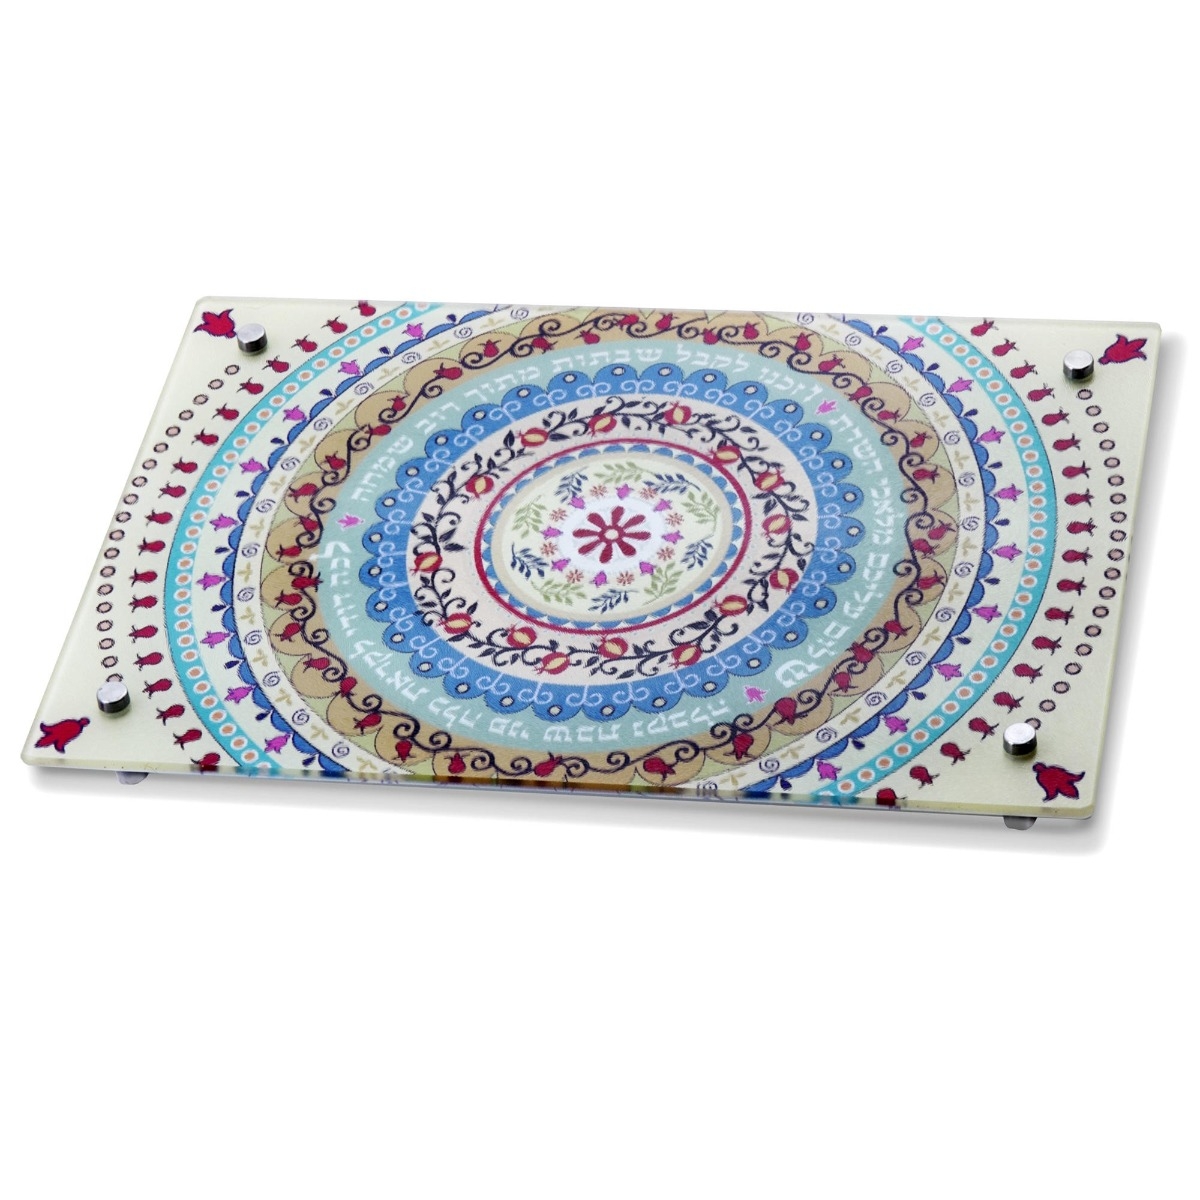 Dorit Judaica Tempered Glass Challah Board with Colorful Pomegranate Design - 1